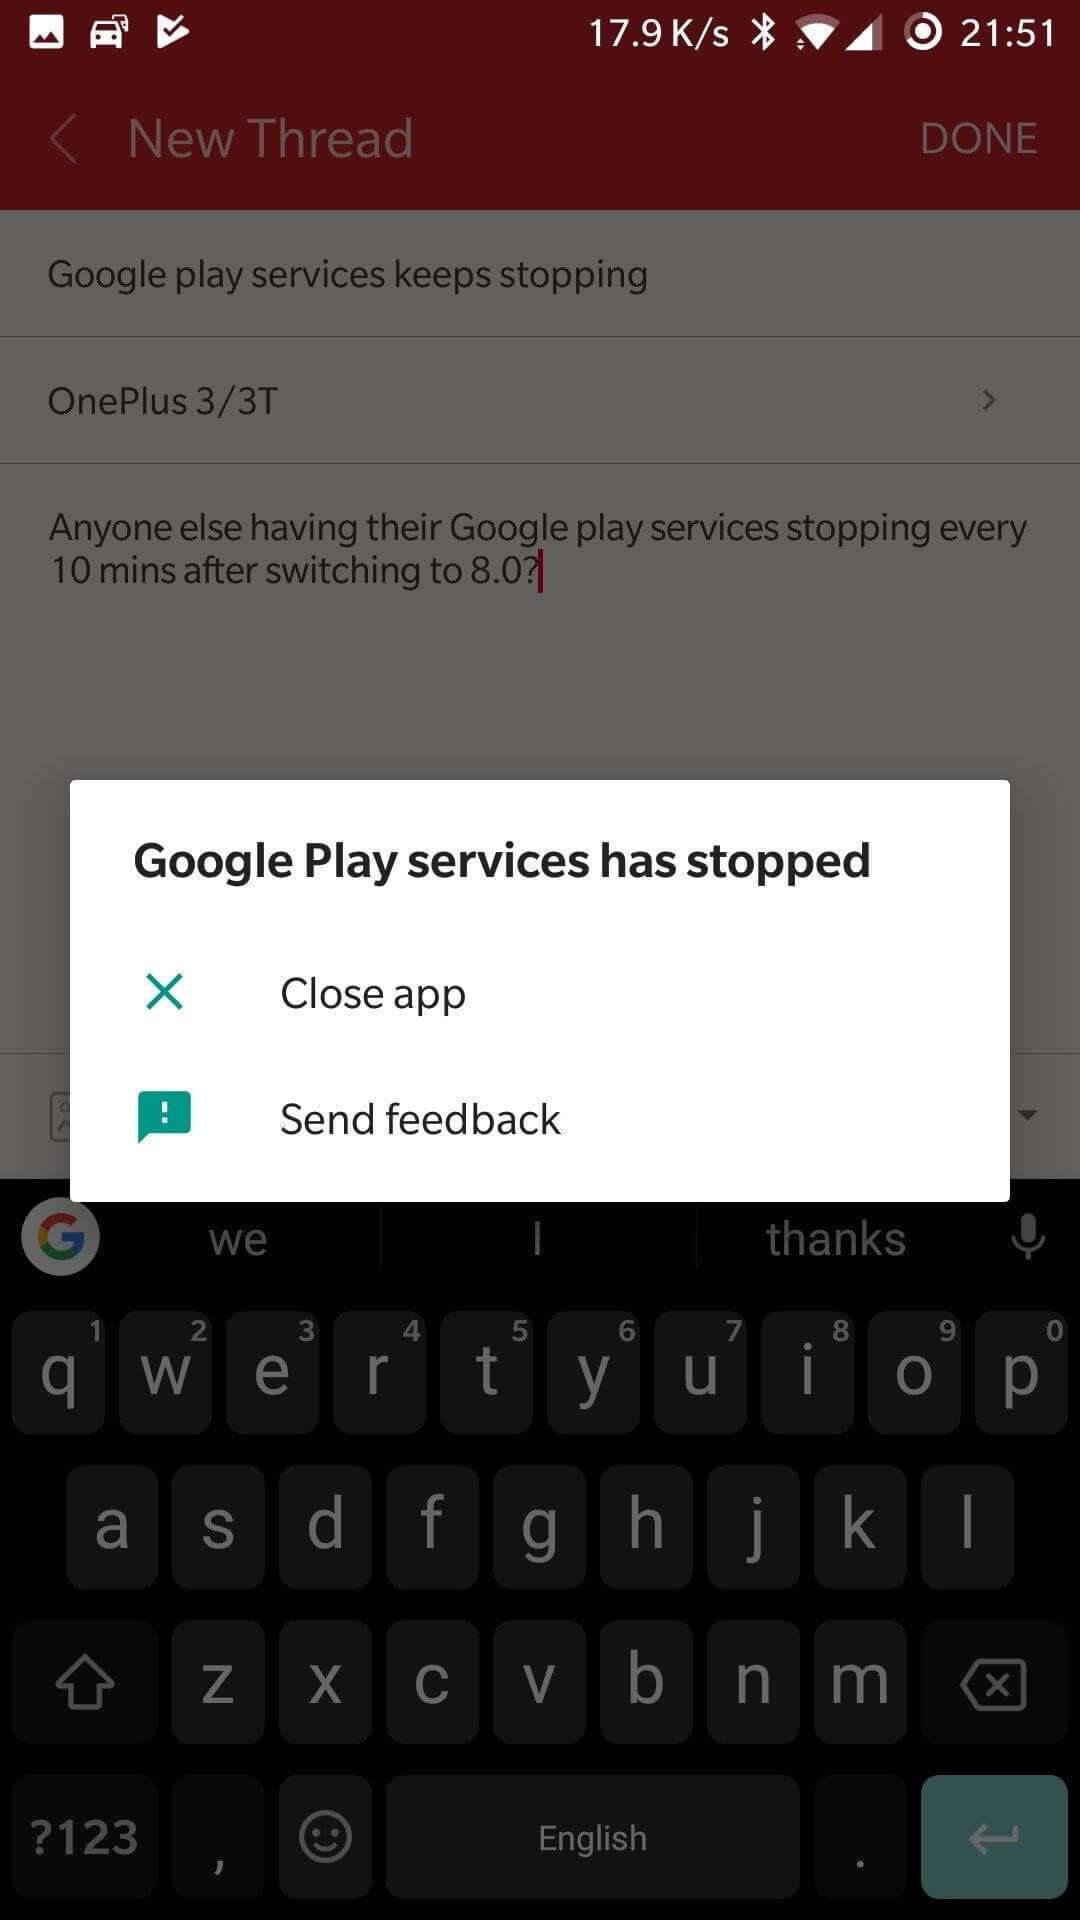 play store keeps saying download pending